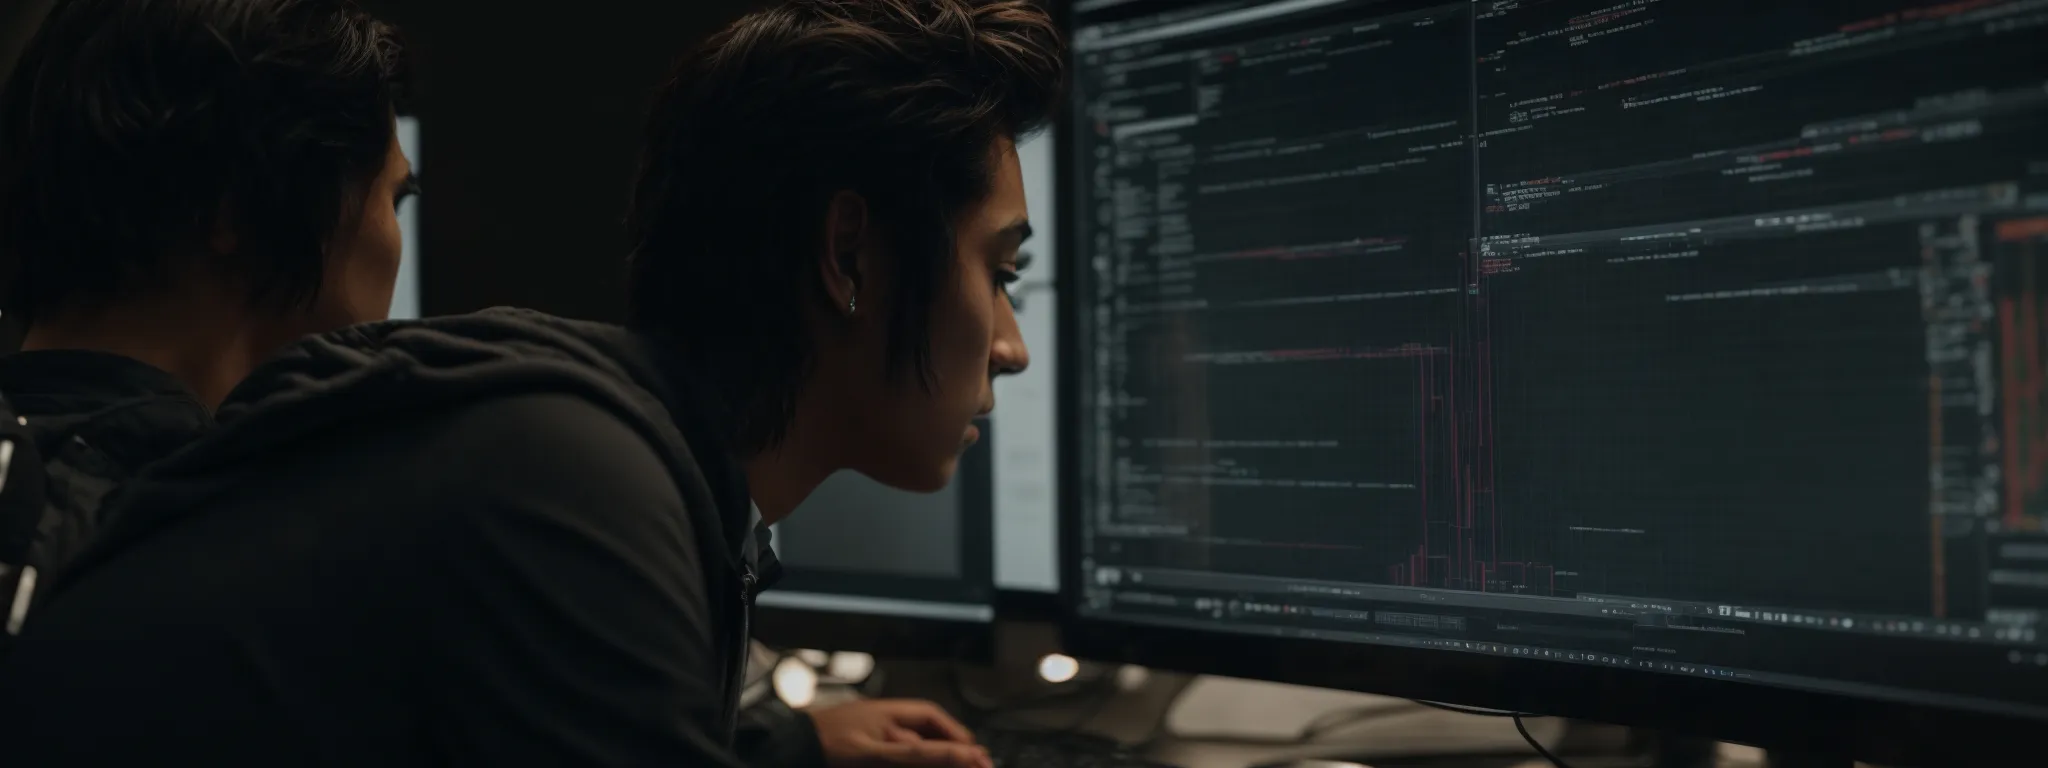 a web developer intently scrutinizes analytics on a computer screen, optimizing a website's search engine results.